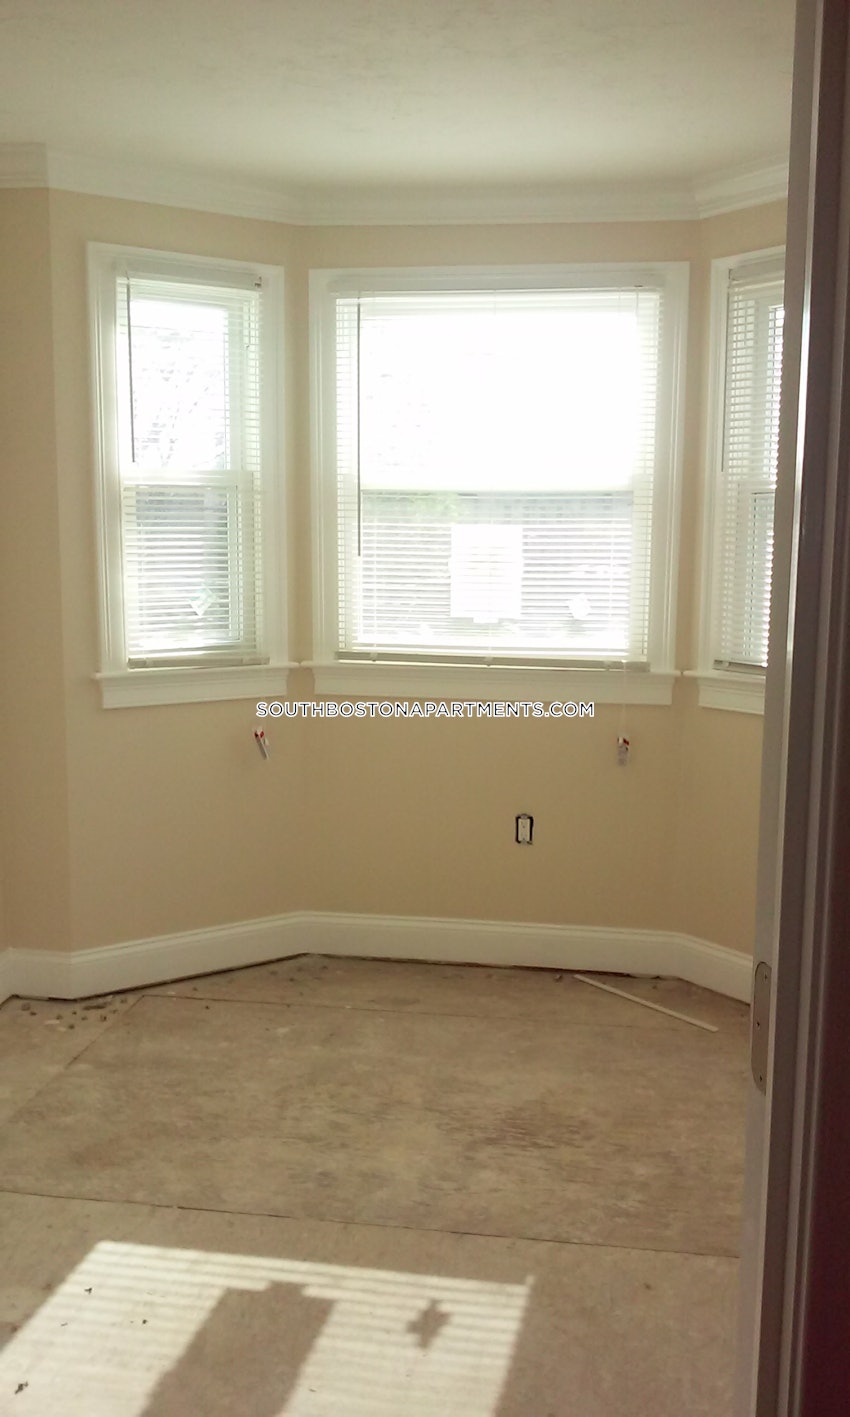 BOSTON - SOUTH BOSTON - ANDREW SQUARE - 4 Beds, 1.5 Baths - Image 33